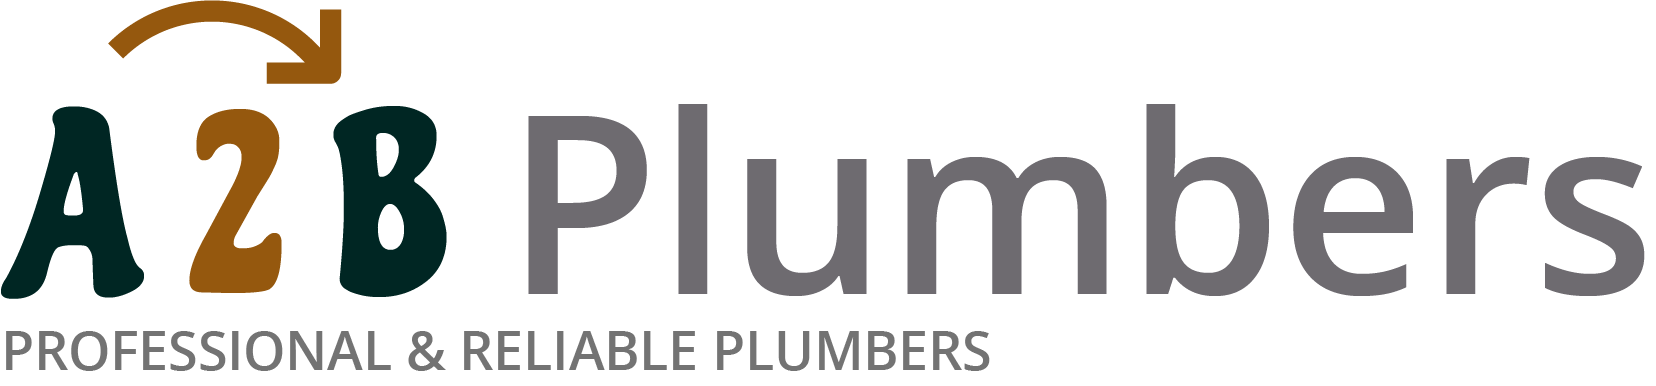 If you need a boiler installed, a radiator repaired or a leaking tap fixed, call us now - we provide services for properties in Ledbury and the local area.